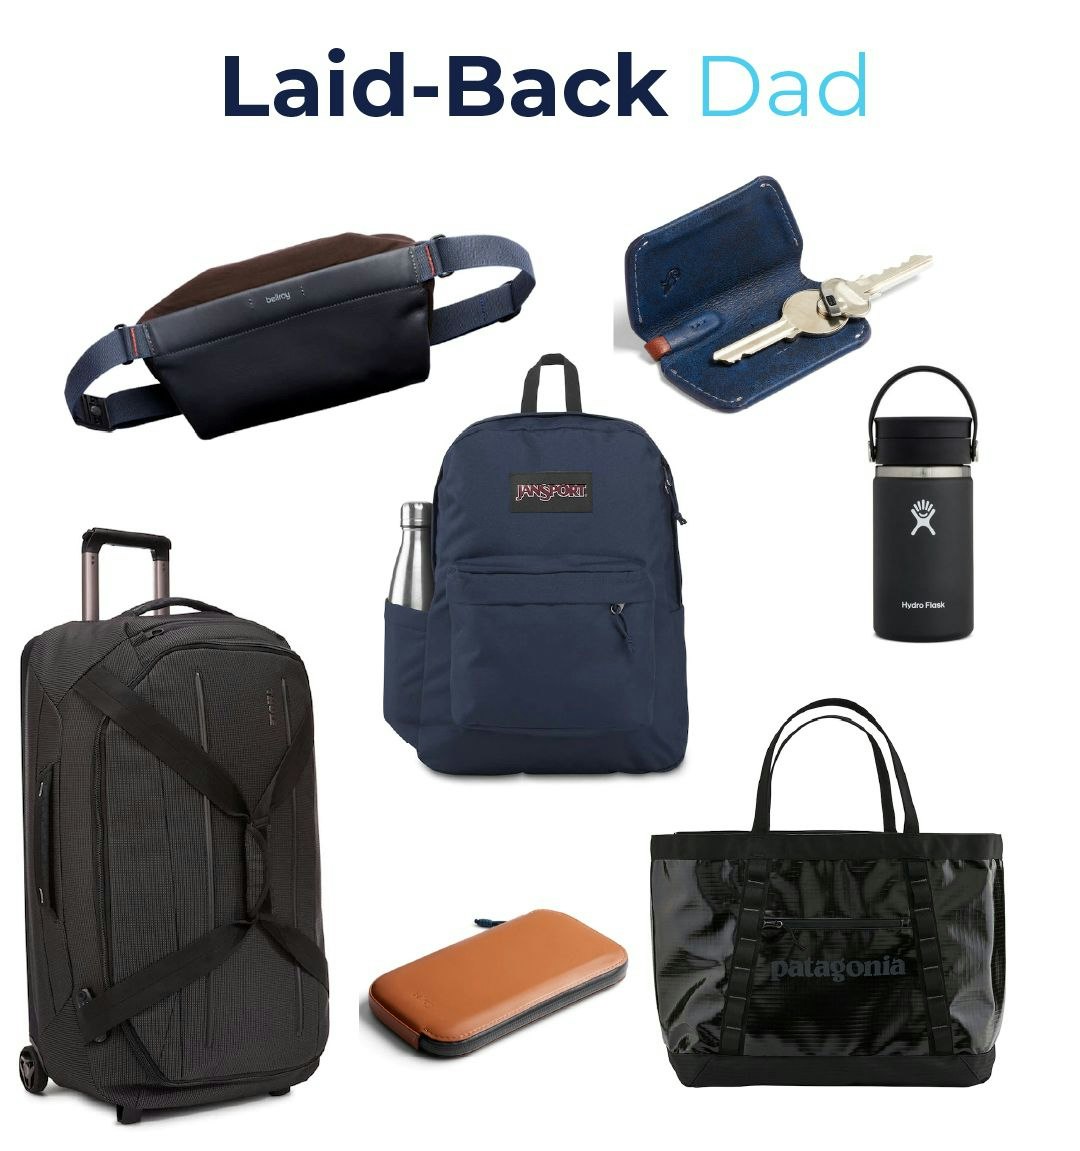 Product gift ideas for a Laid-Back Dad